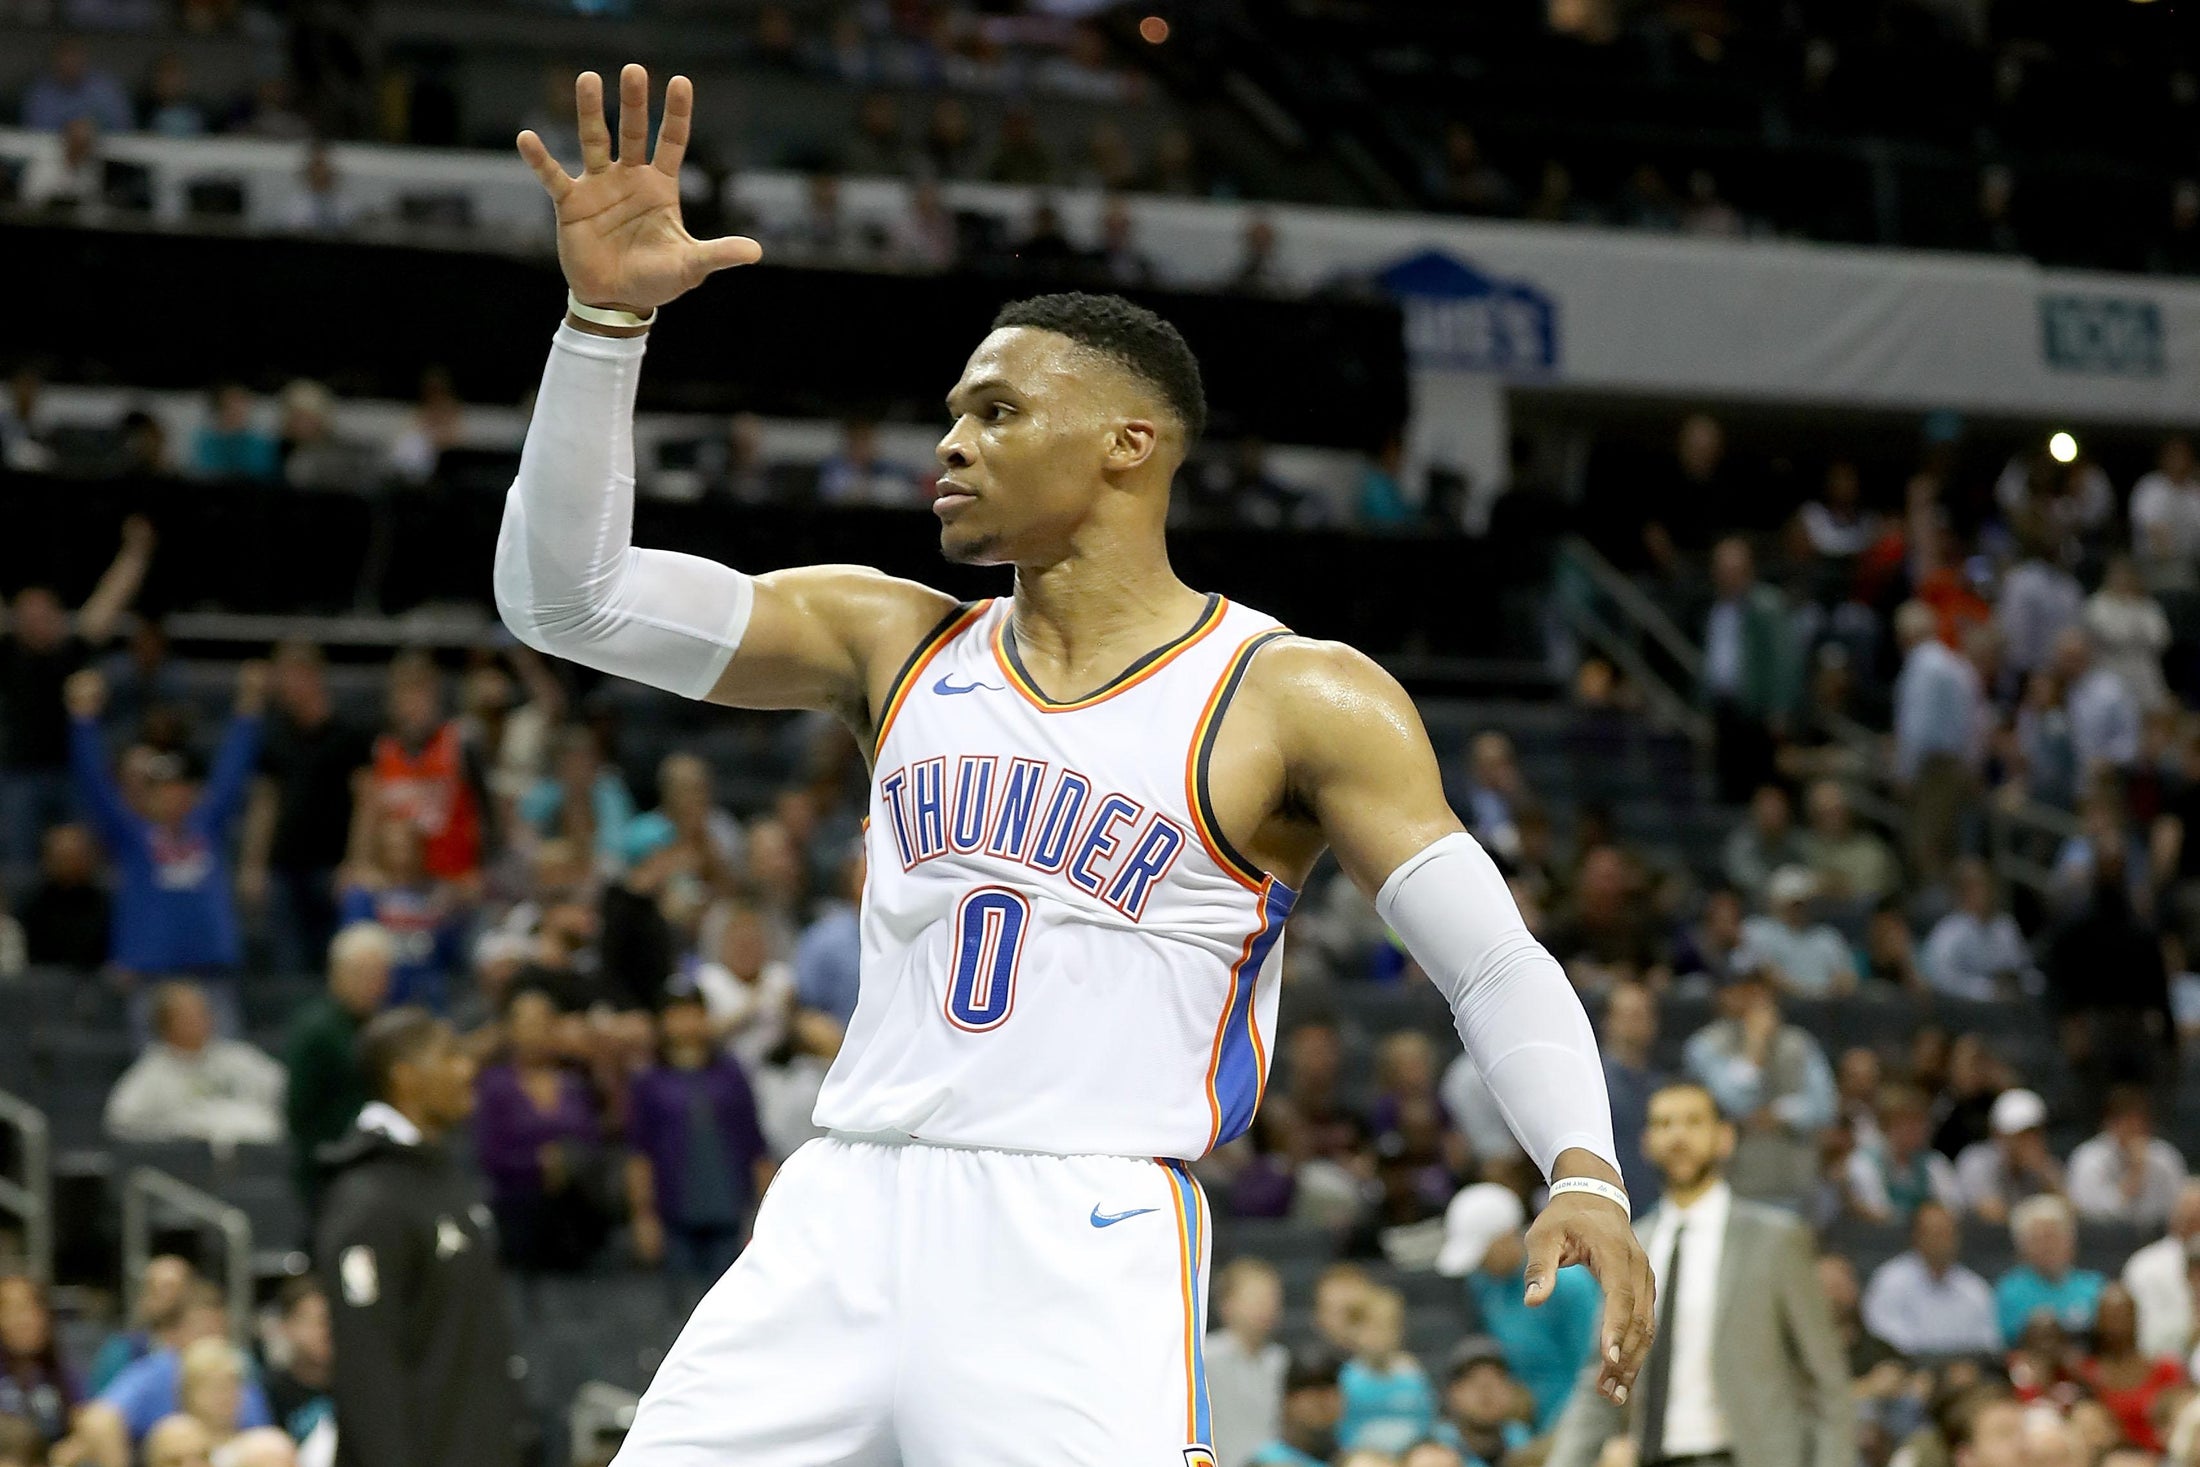 Russell Westbrook’s “rock the baby” taunt is sweeping the NBA.